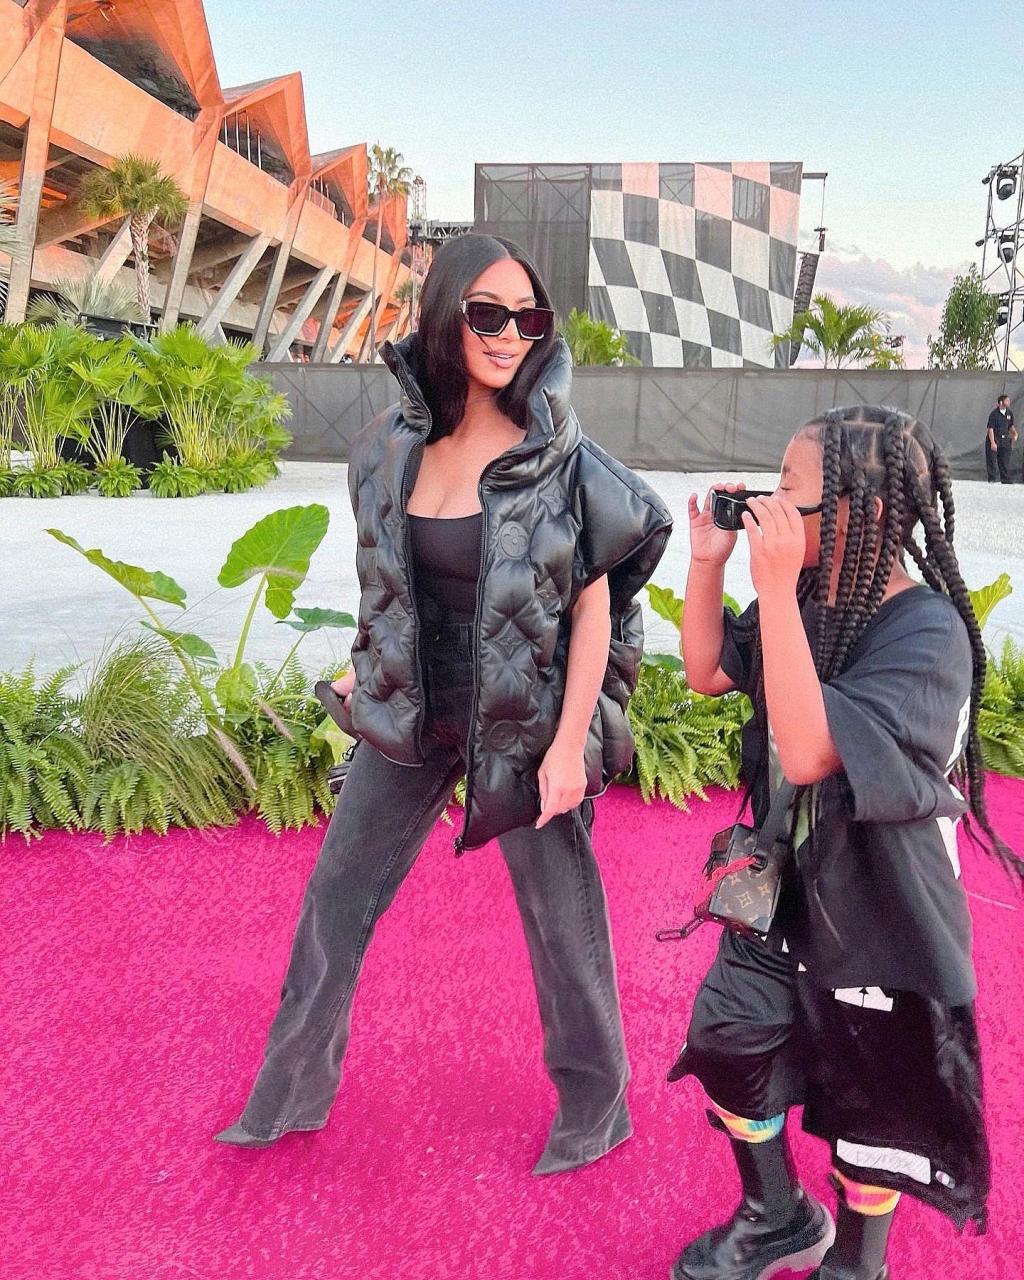 Kim Kardashian and her daughter, North, were walking the pink carpet in a new Instagram post